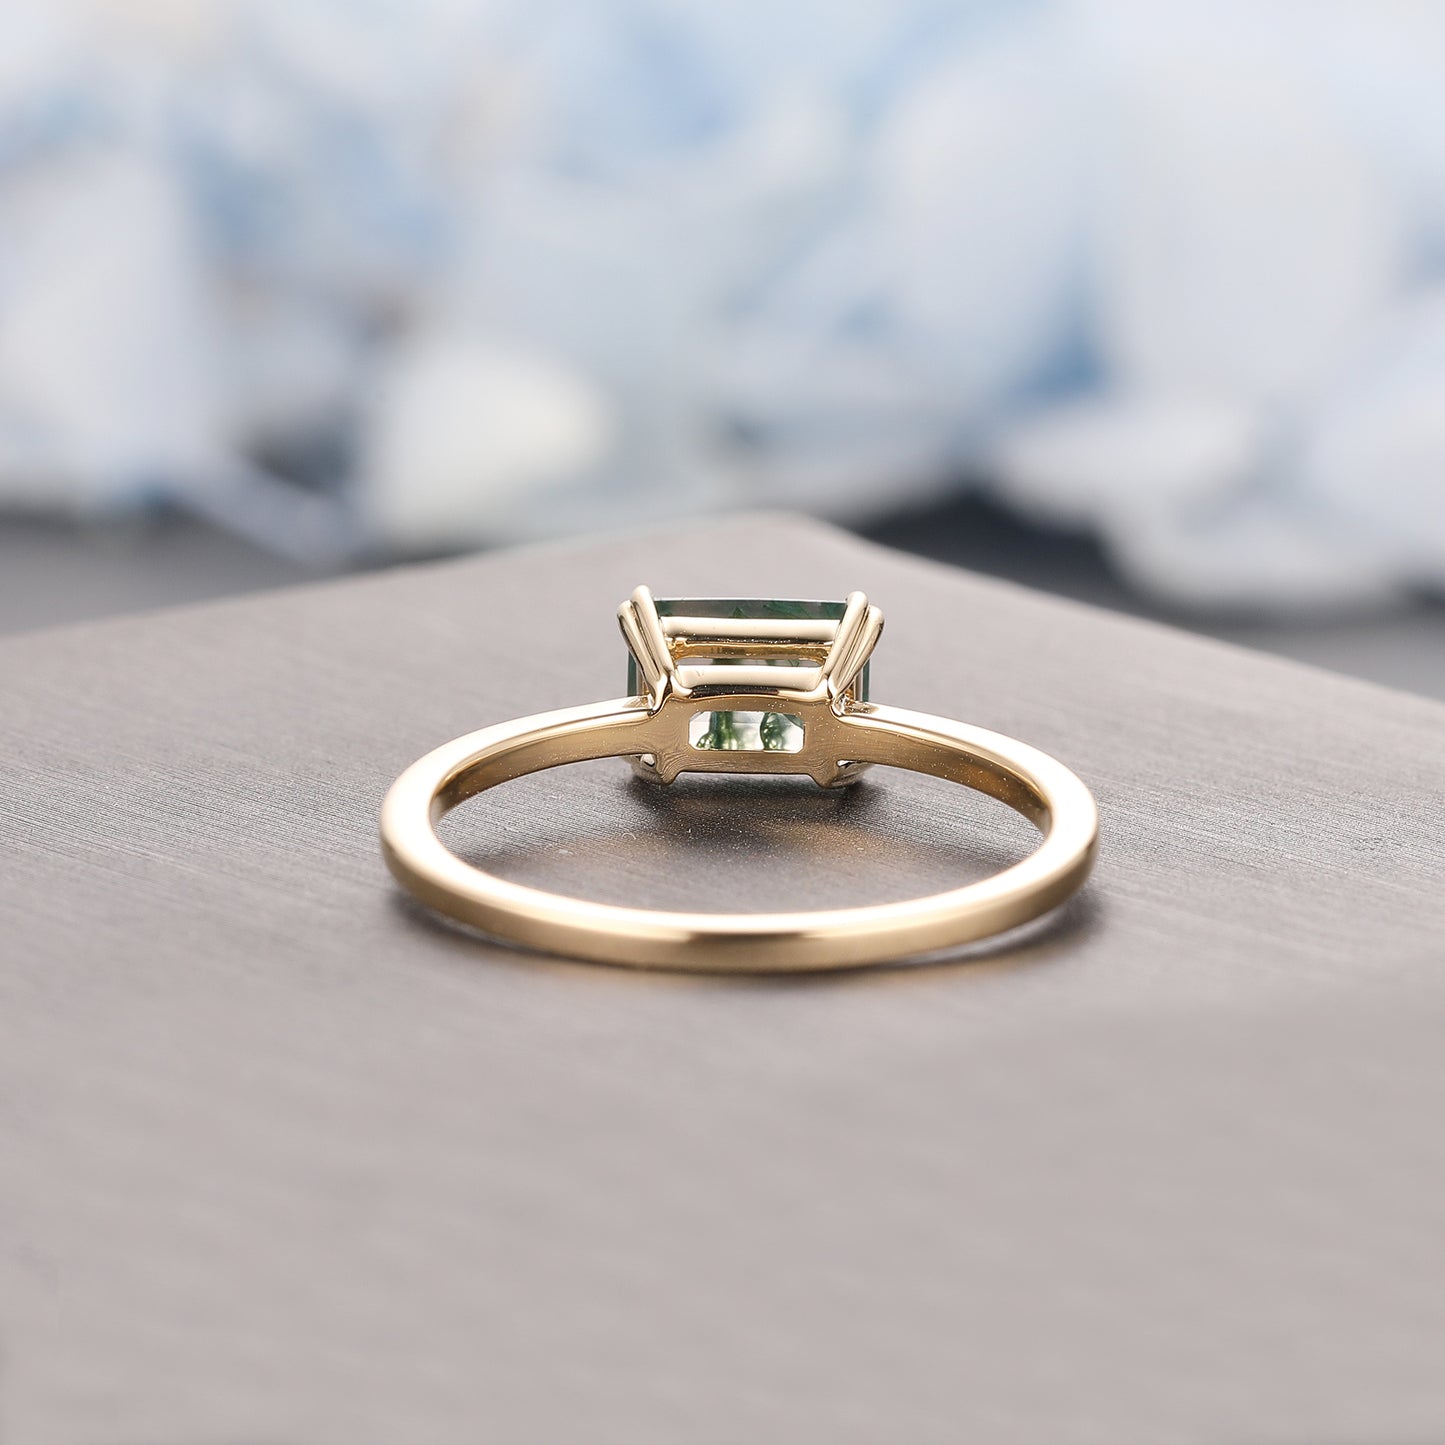 G001 Unique Design 1 Carat Emerald Cut Solitaire Moss Agate Engagement Ring In 14K Gold For Women